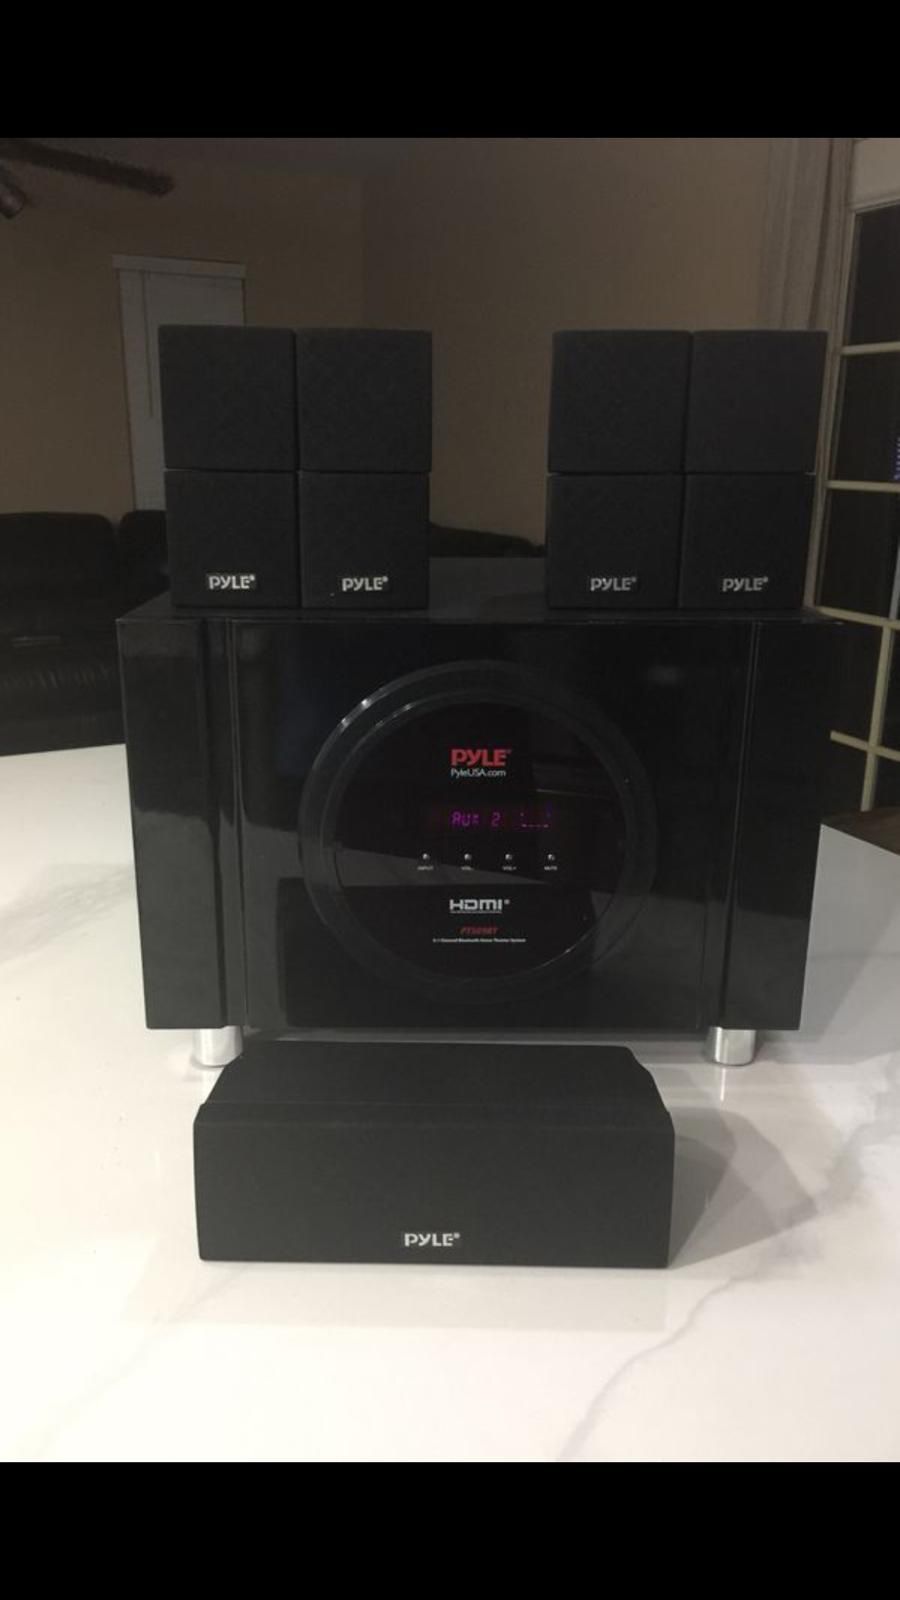 PYLE 5.1 Channel Home Theater Speaker System